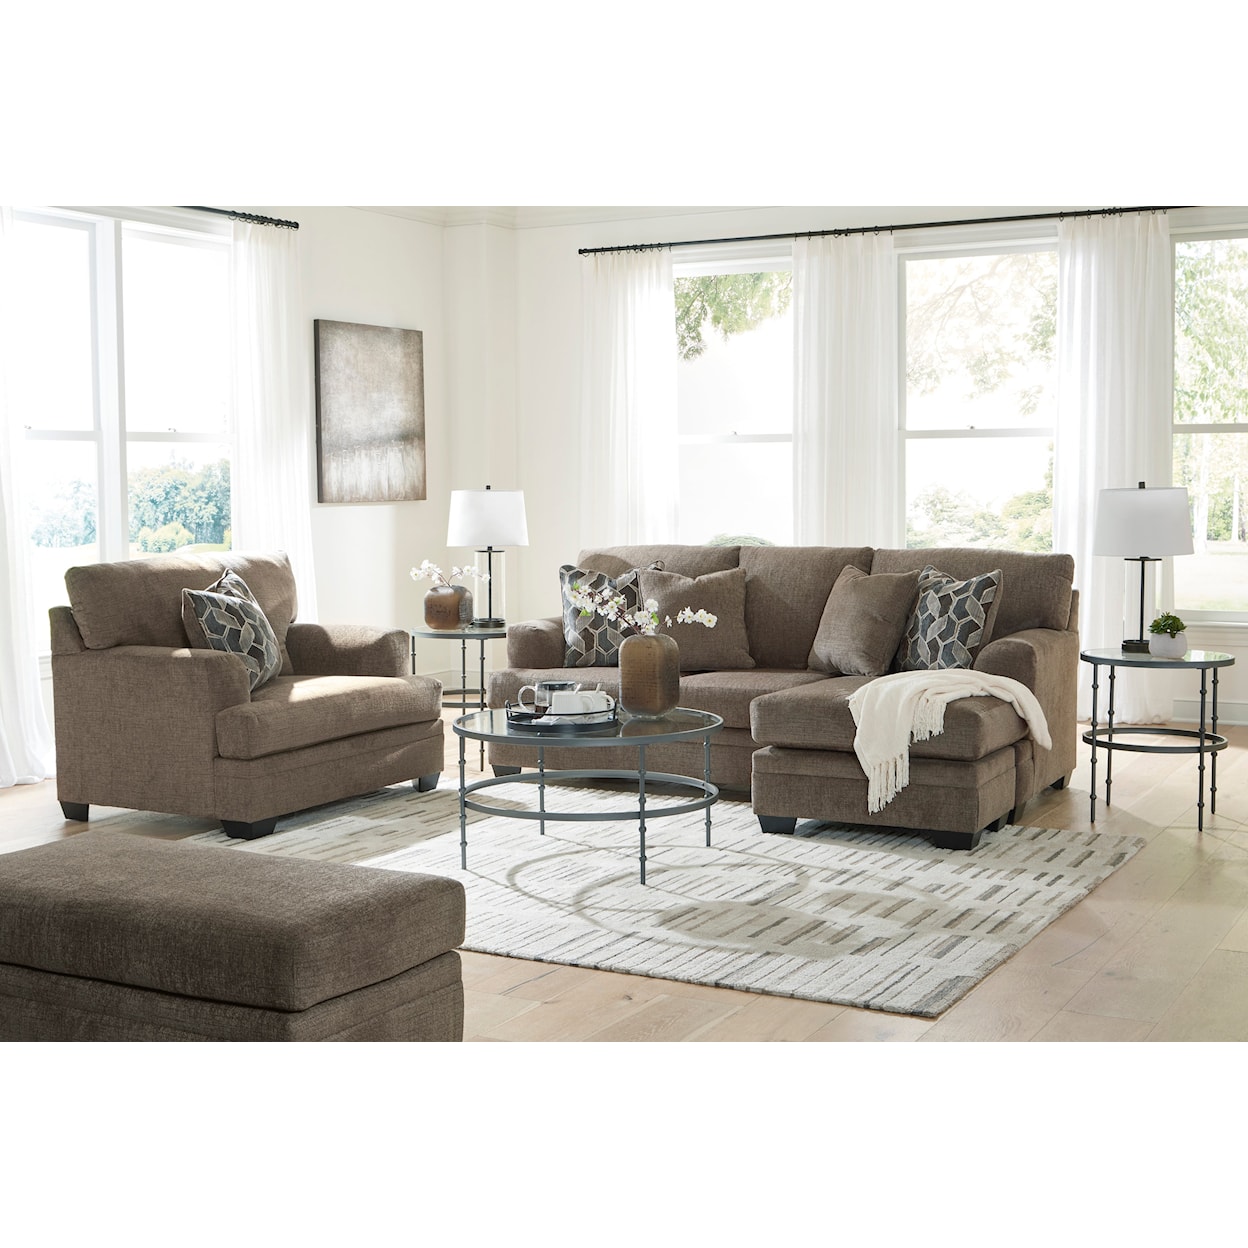 Signature Design Stonemeade Sofa Chaise, Oversized Chair and Ottoman